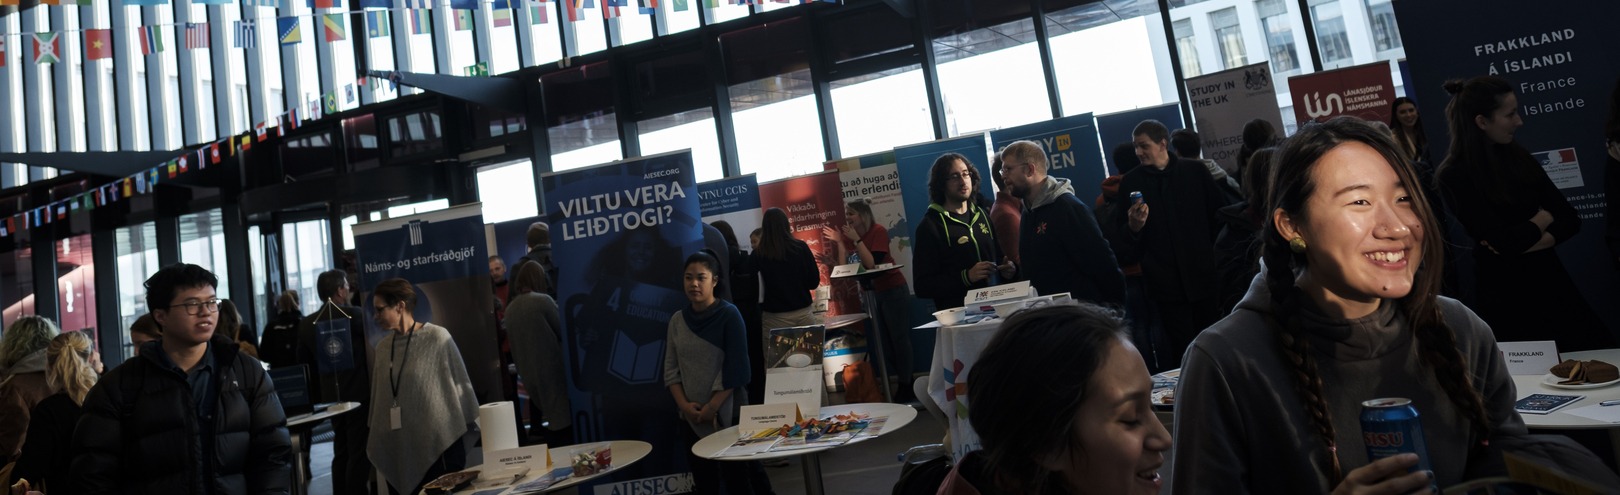 International Festival - Available at University of Iceland